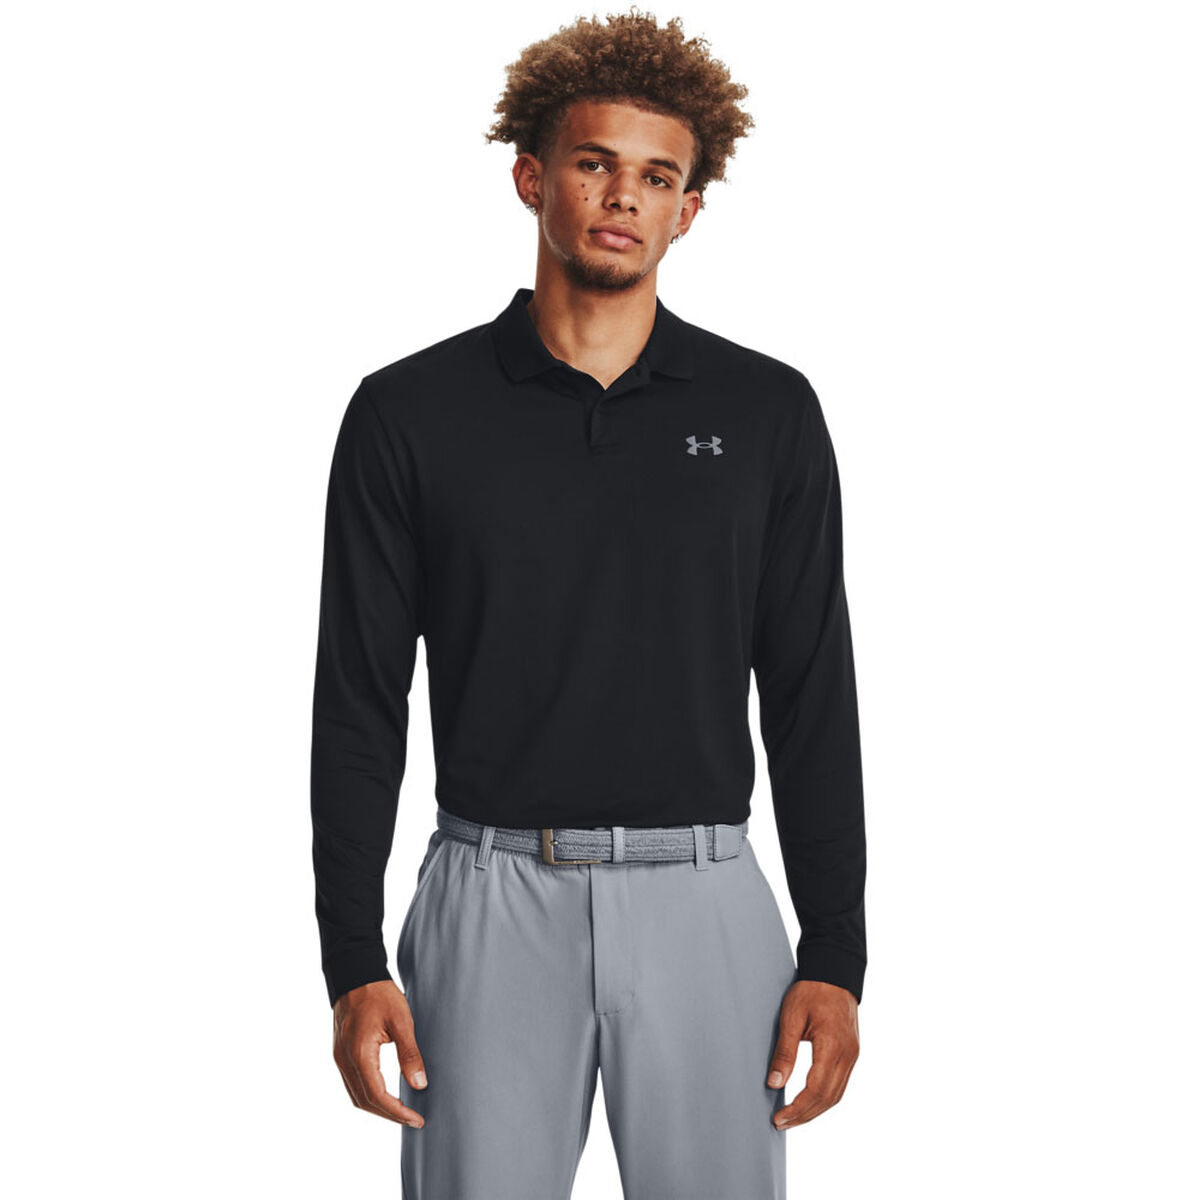 Under Armour Men's Black and Grey Performance 3.0 Long Sleeve Golf Polo Shirt, Size: XL | American Golf von Under Armour